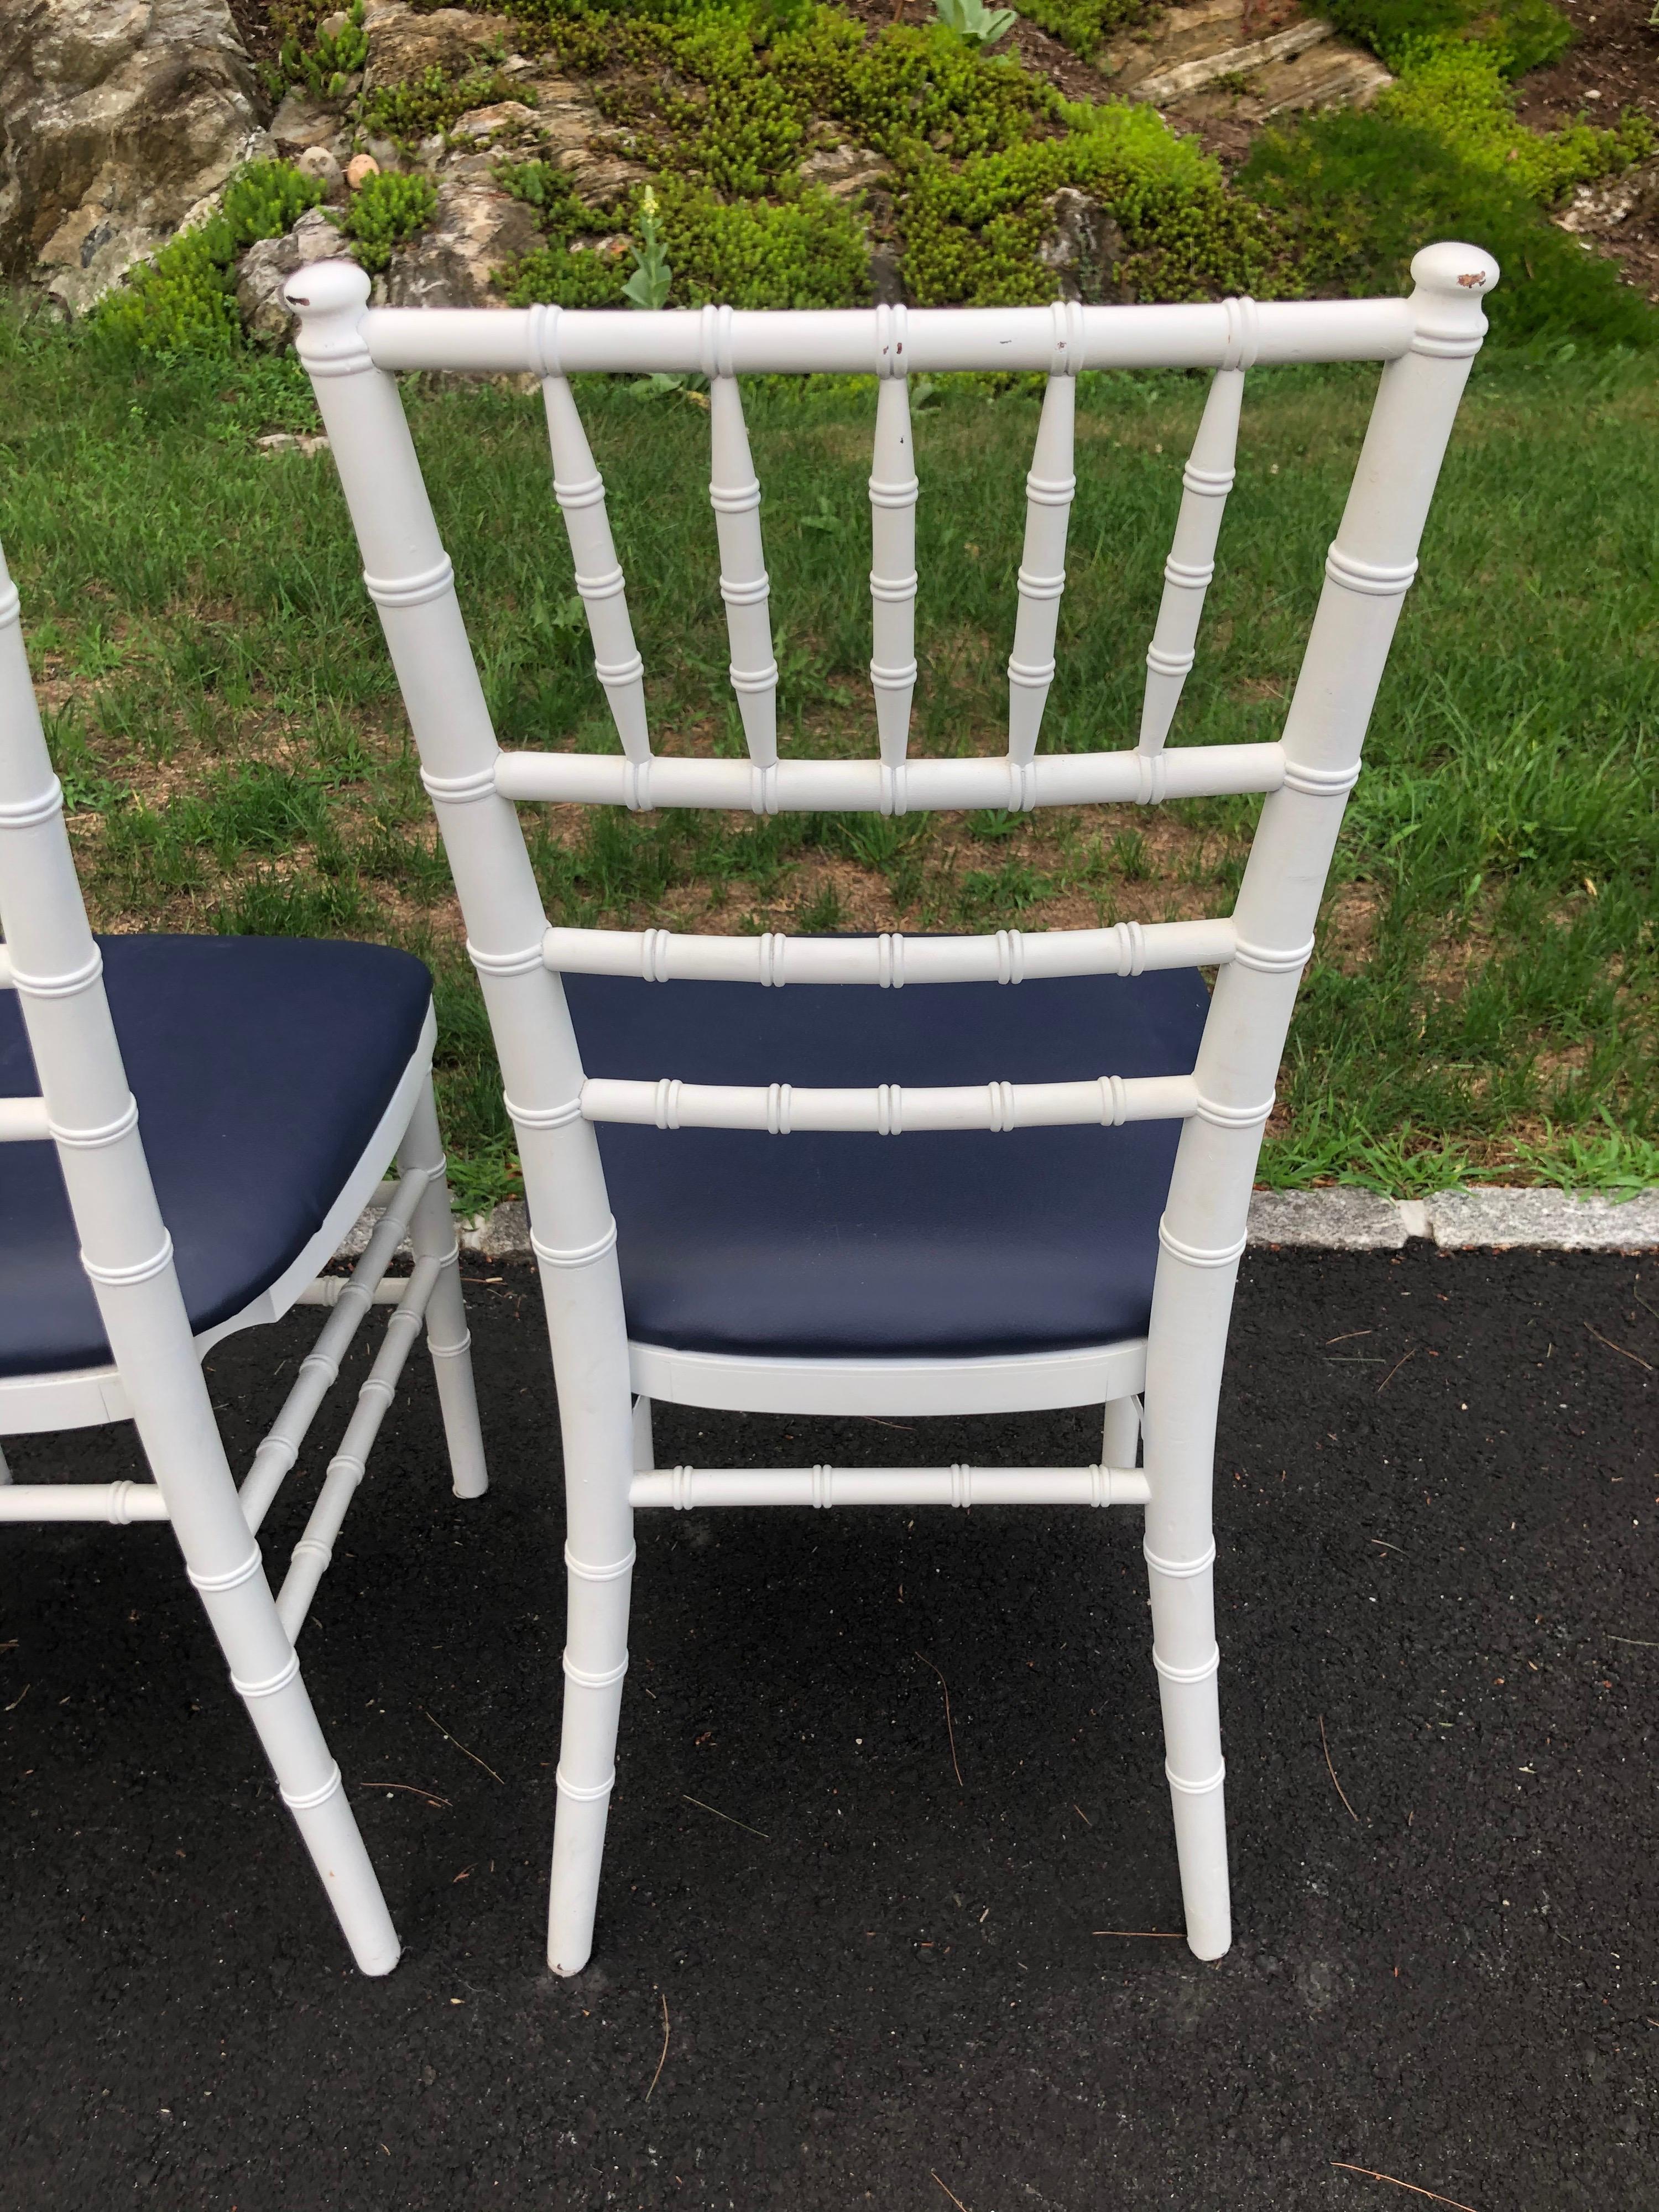 Set of Four Classic White Wooden Chiavari Chairs with Navy Seats For Sale 7